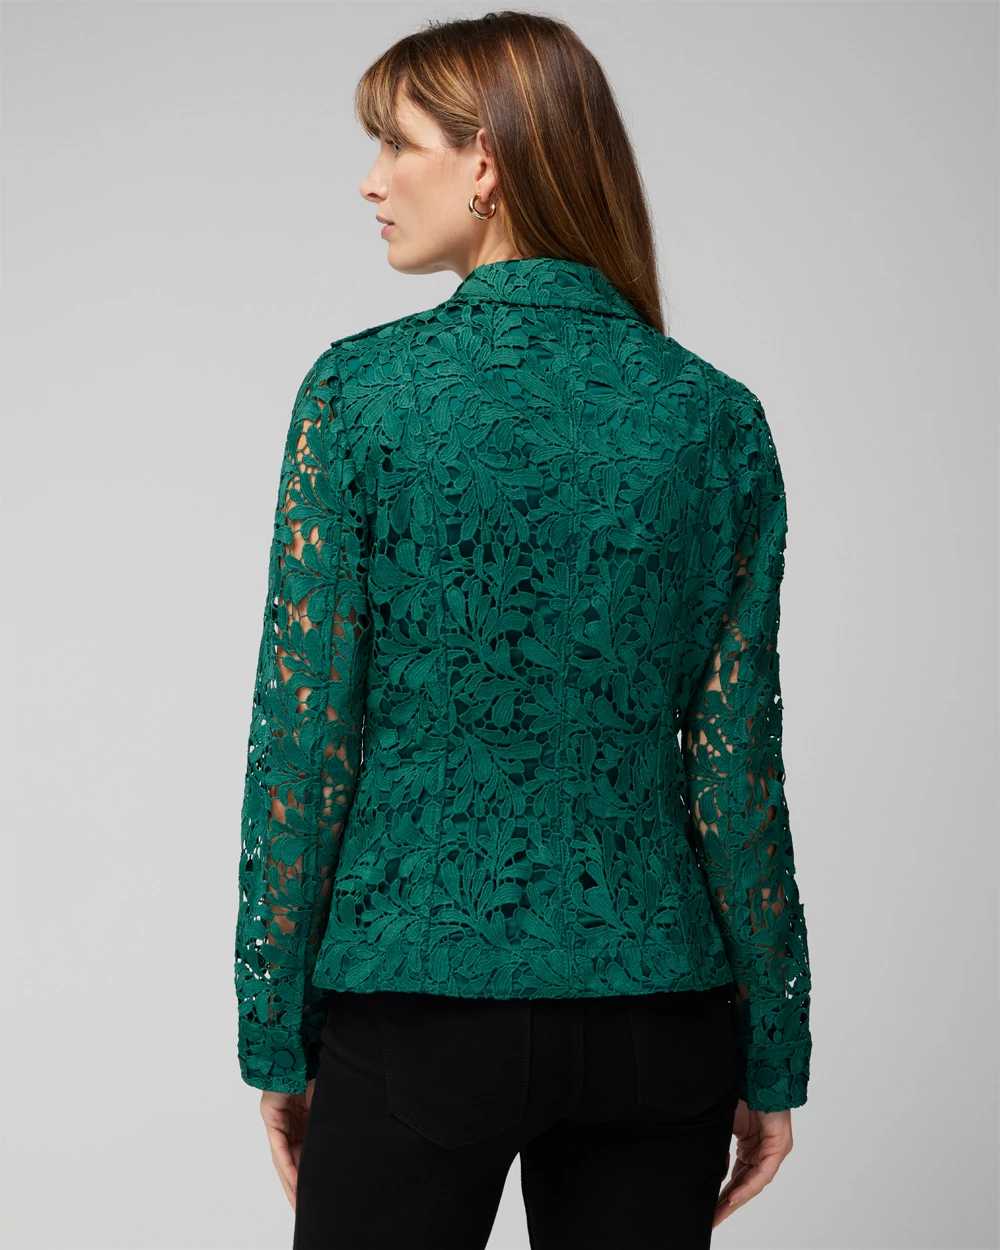 Petite Lace Pocket Jacket click to view larger image.